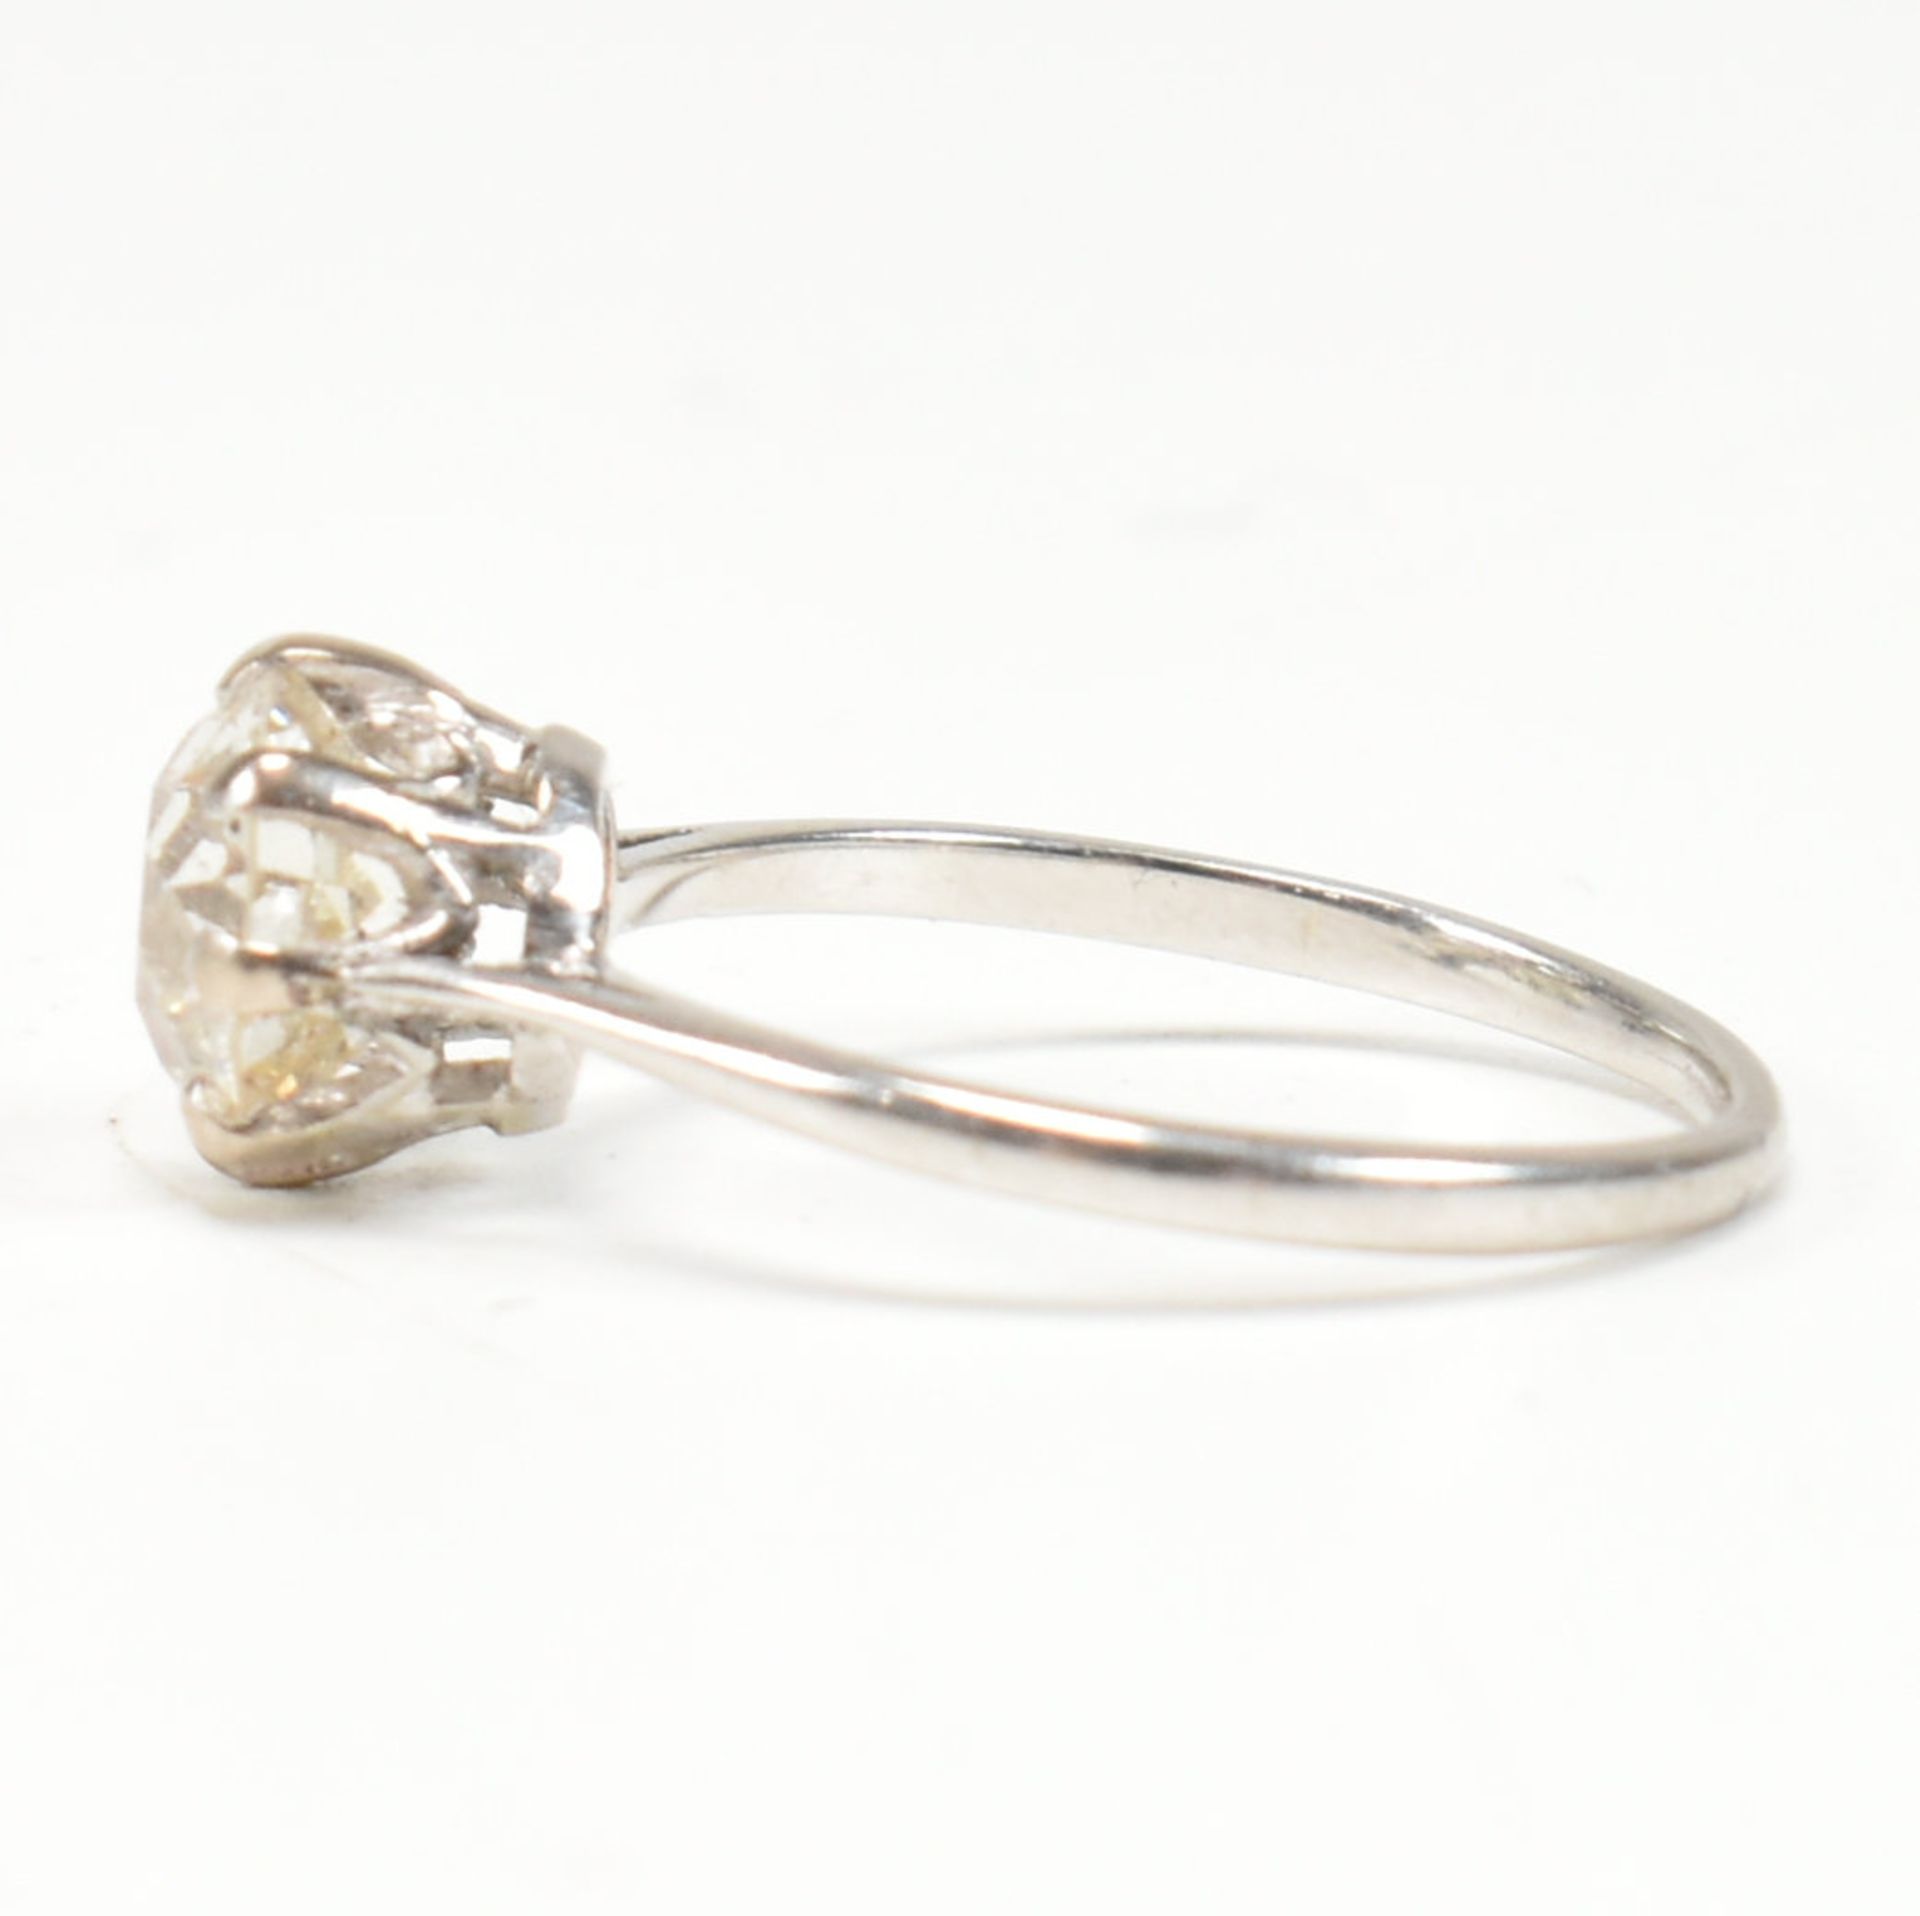 1930S 1.7CT DIAMOND SOLITAIRE RING - Image 6 of 9